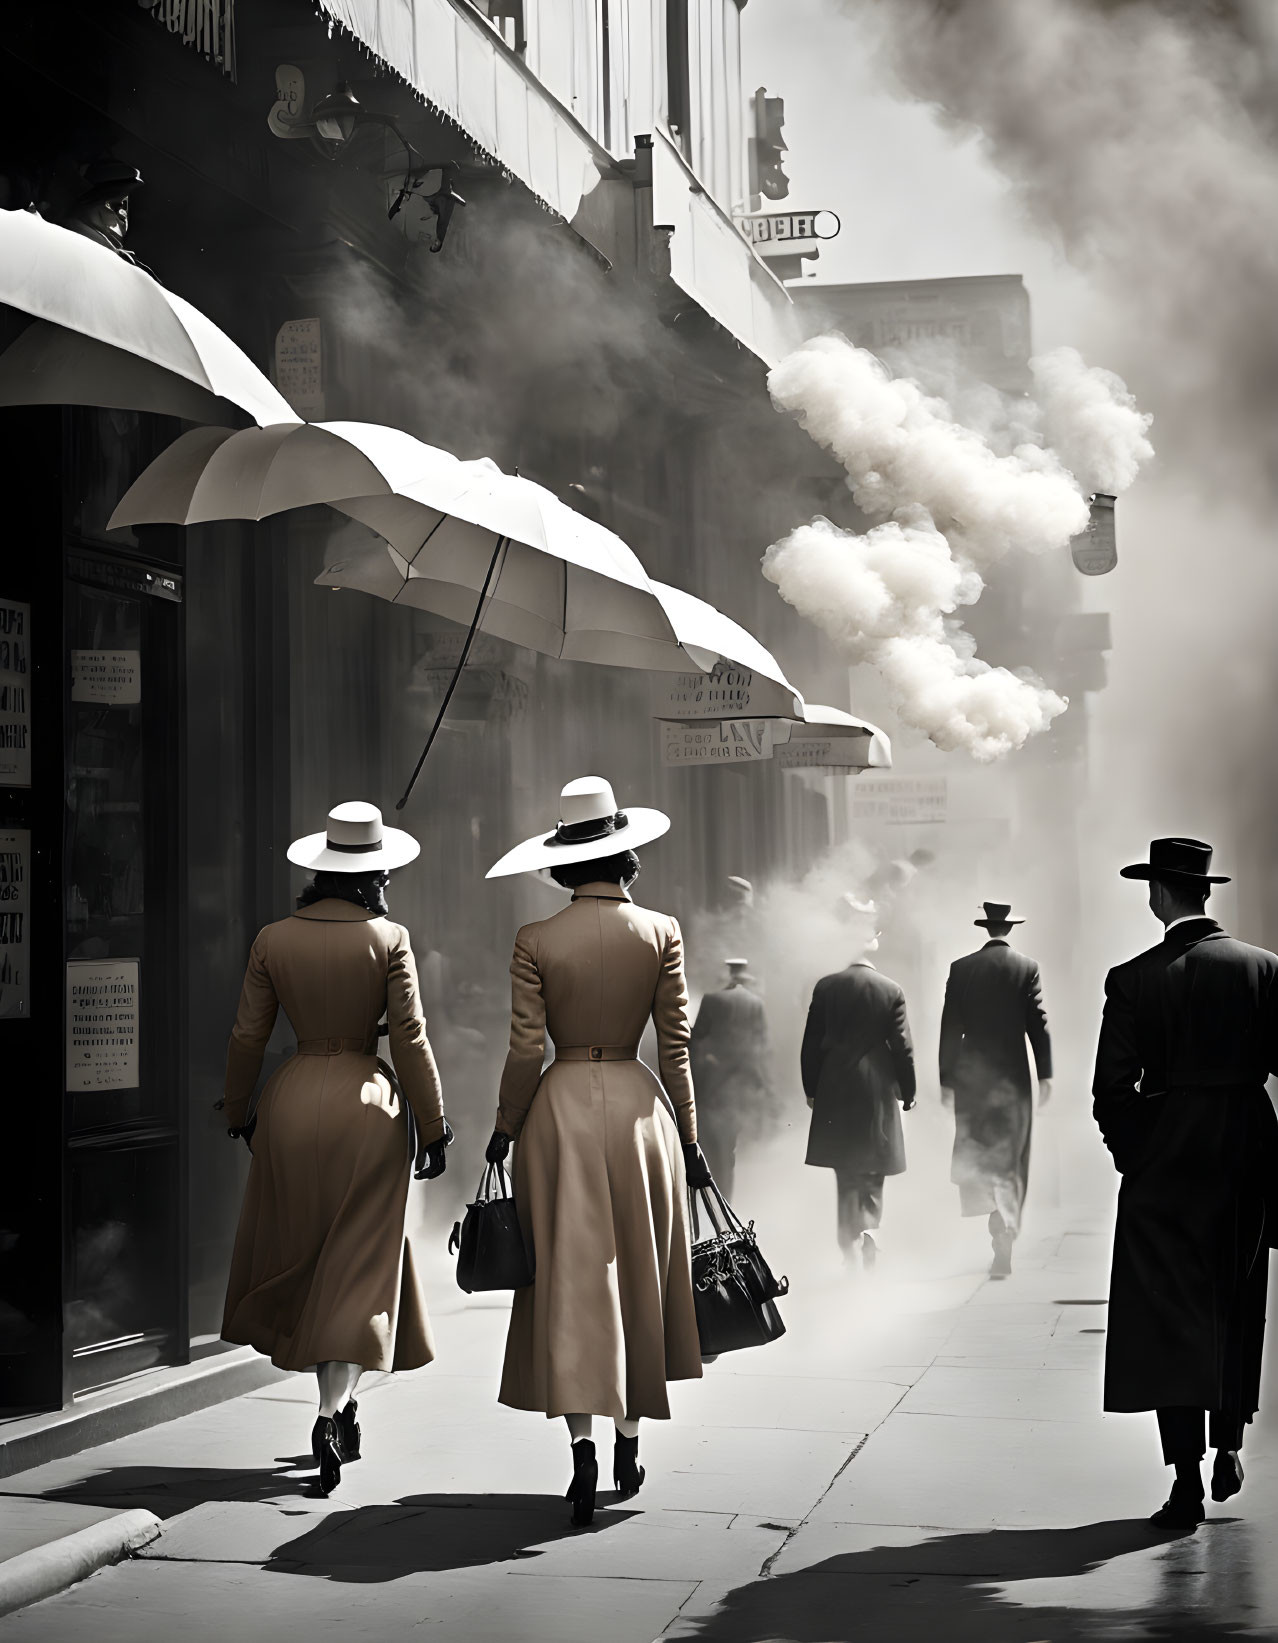 Pair in trench coats and hats stroll misty street with shops and pedestrians